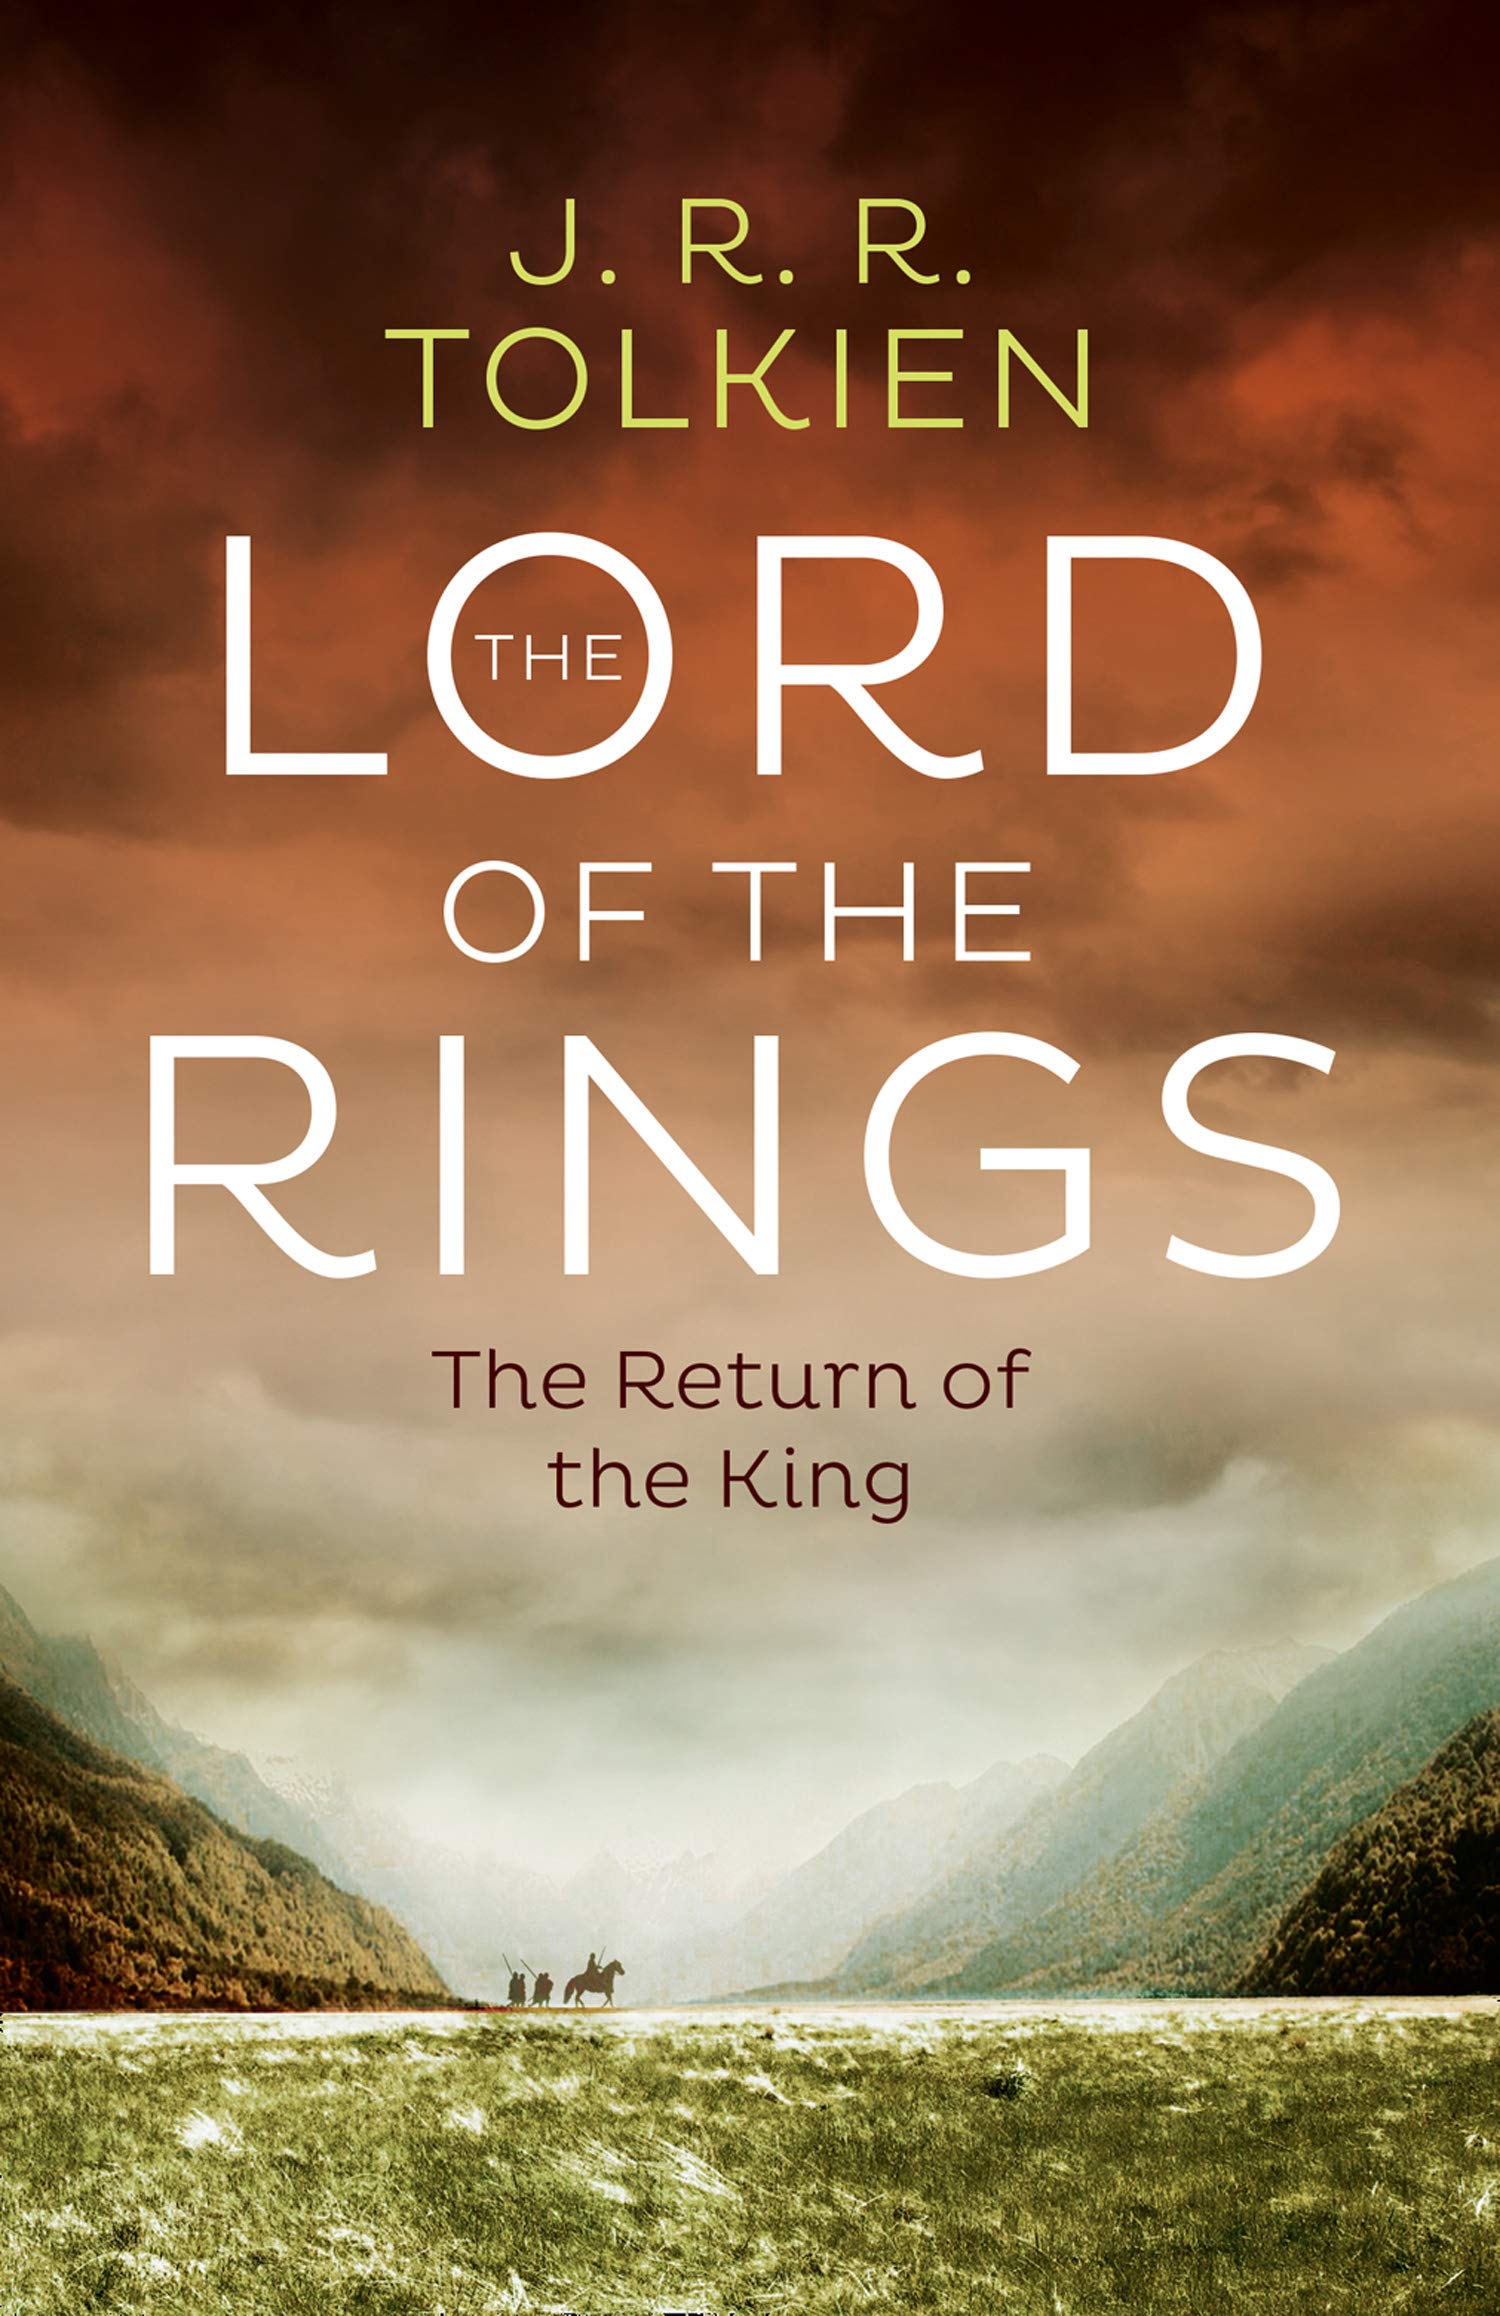 the return of the king by jrr tolkien